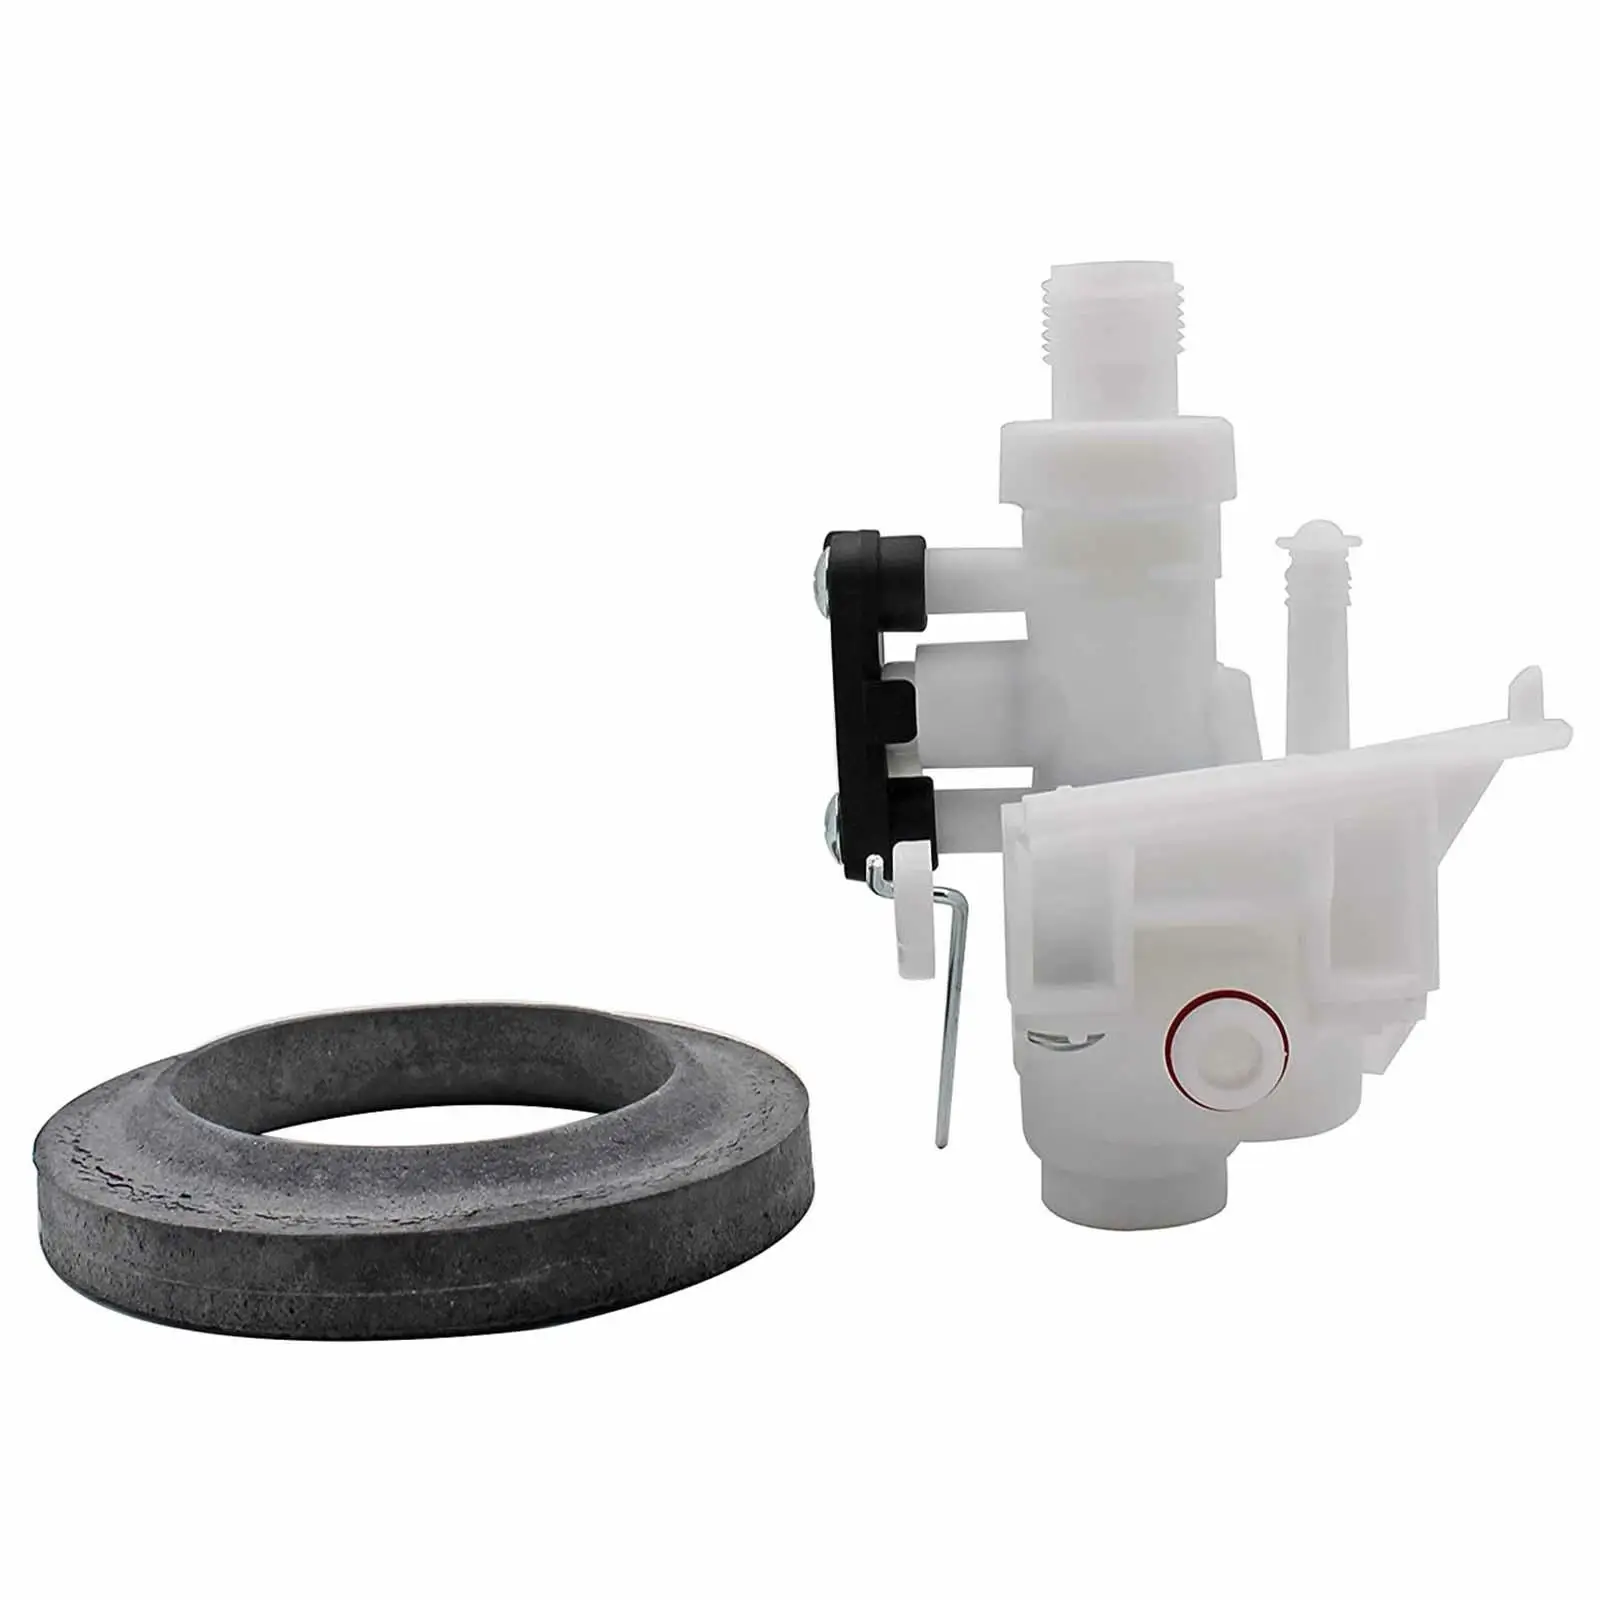 31705 Water Valve with Seal Leak Resistant Convenient RV Toilet Valve with Seal for RV Motor home campers Accessory Replace